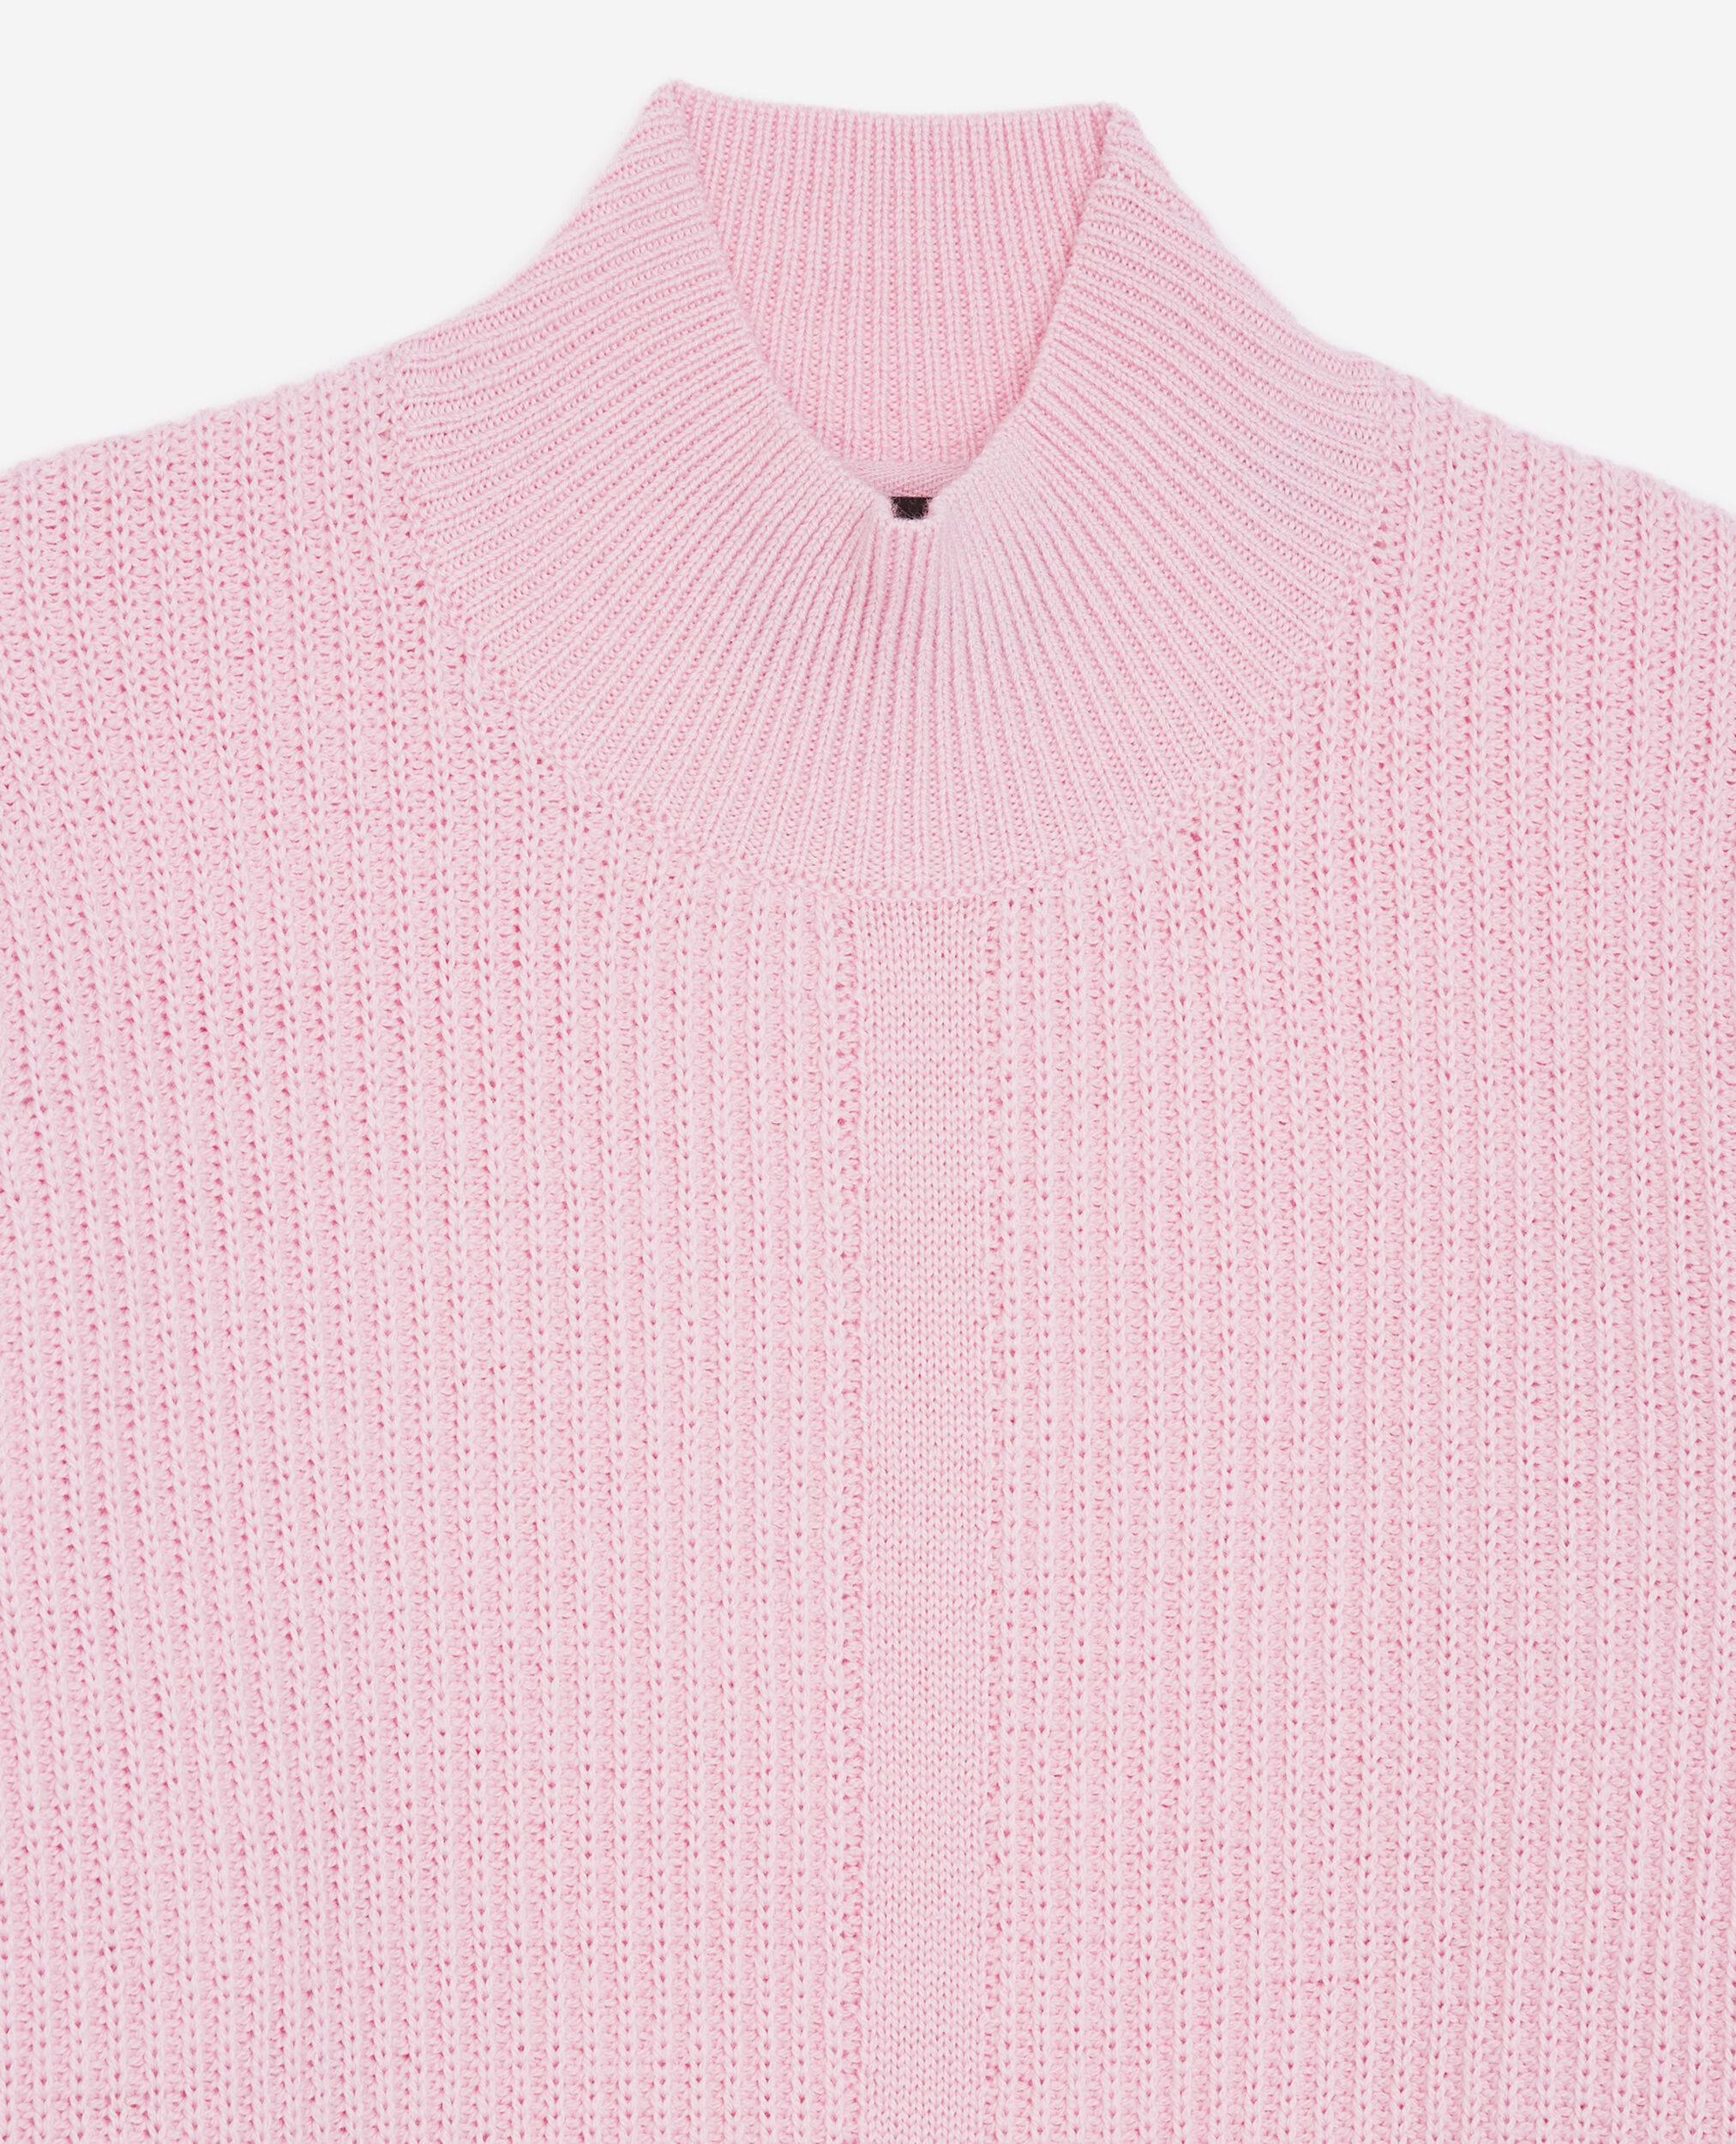 Roomy light pink sweater in merino wool, PINK, hi-res image number null